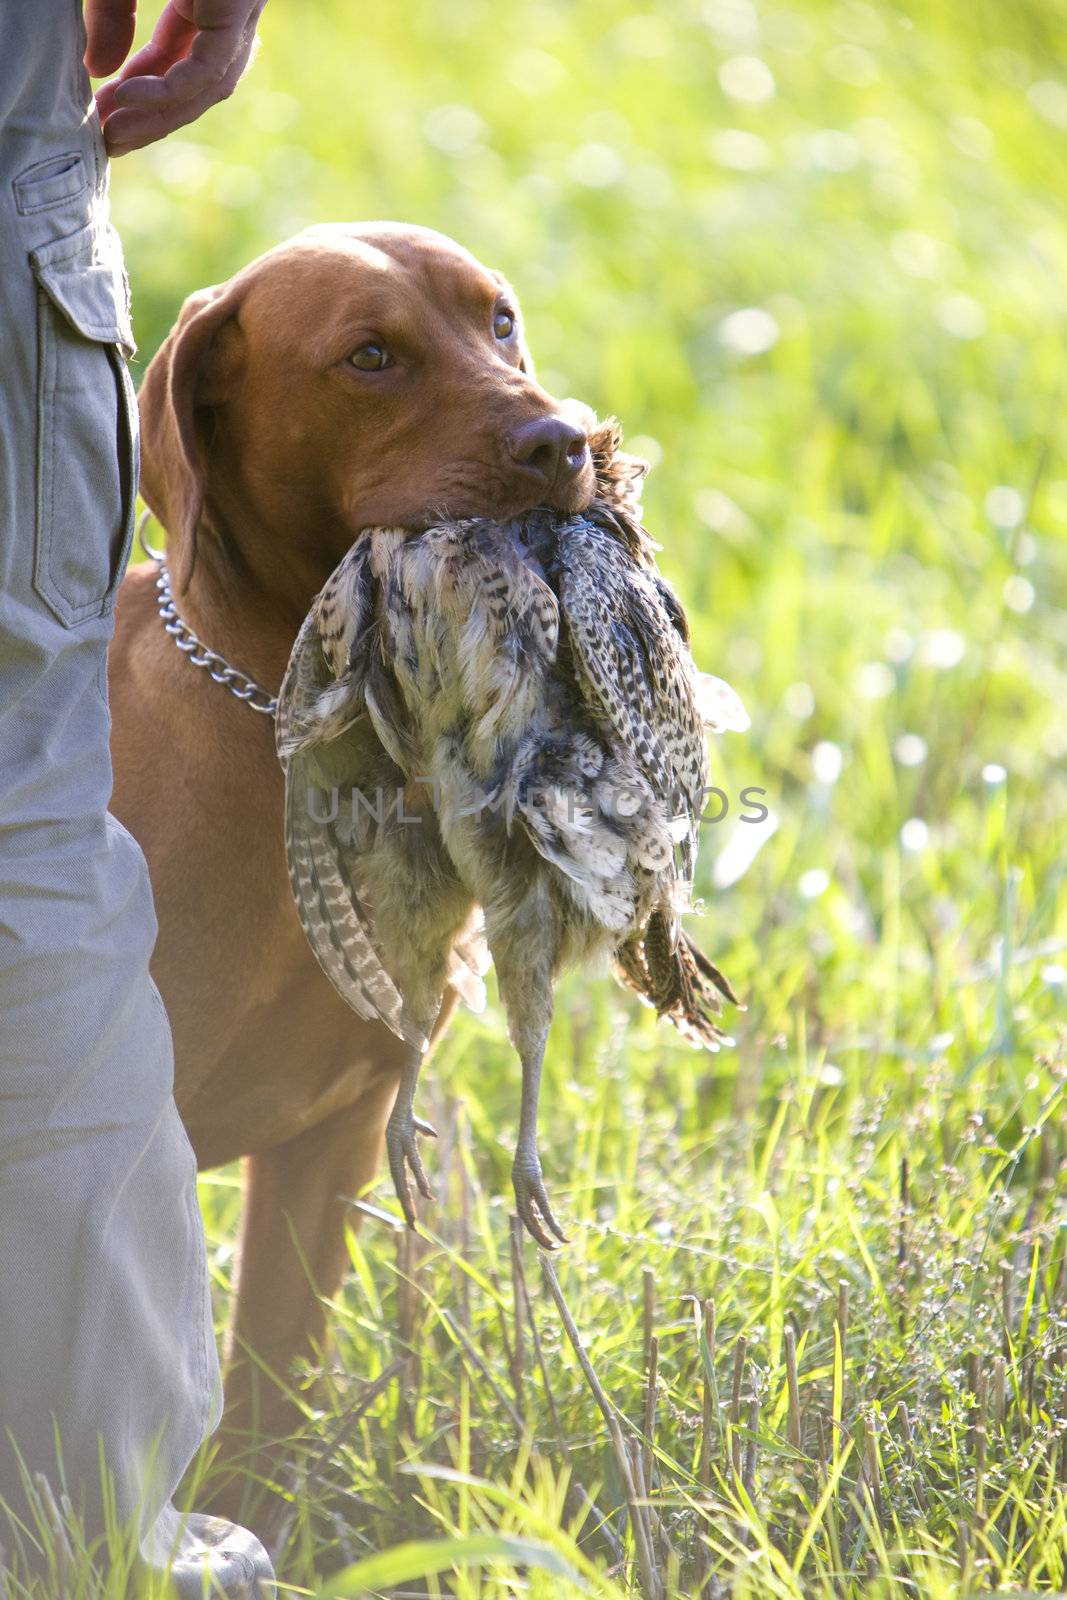 hunting dog with a catch by phbcz